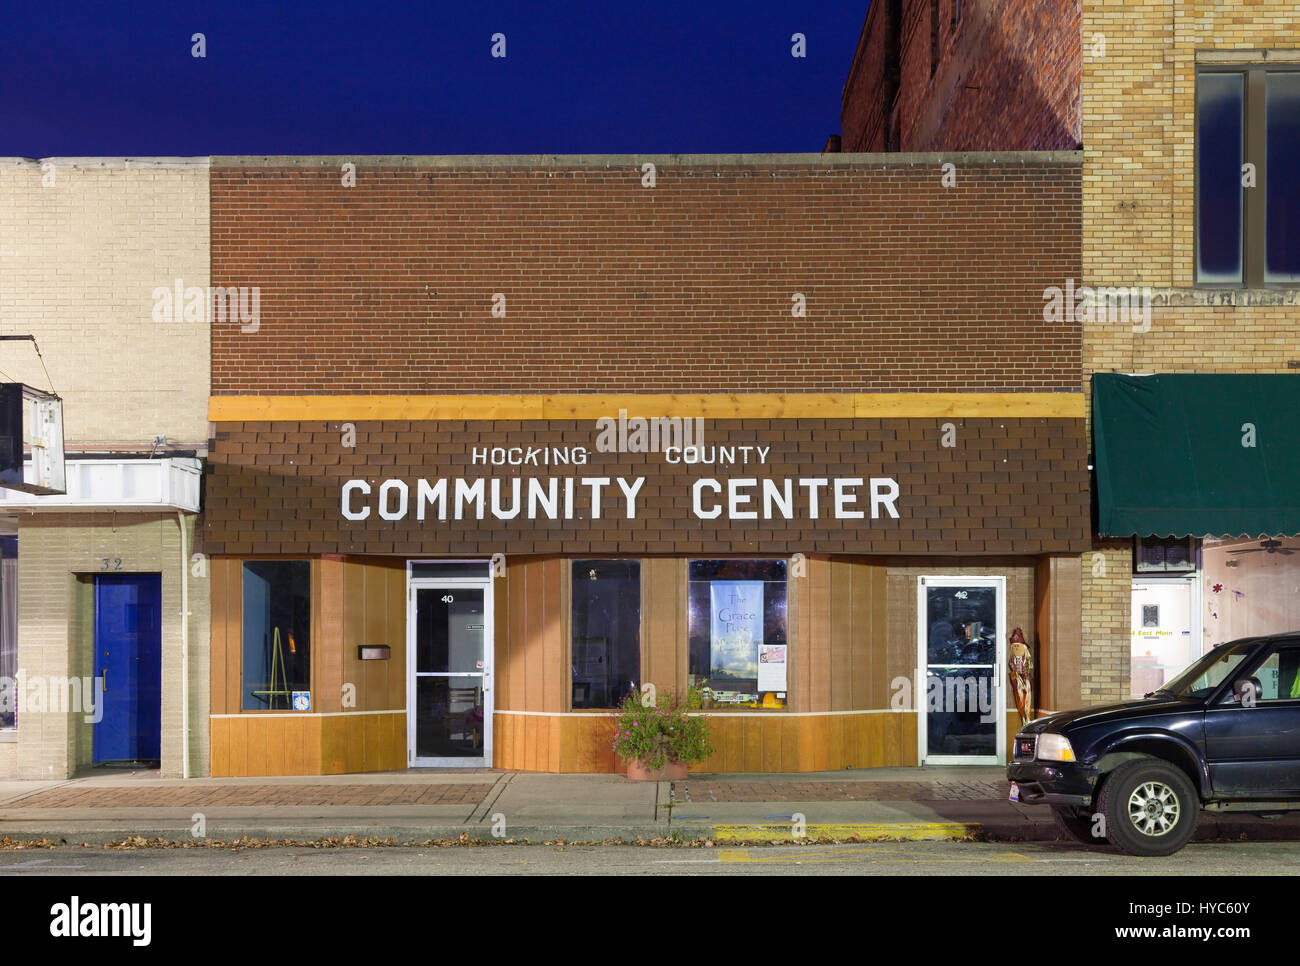 The Hocking County Community Centre at dusk in downtown Logan, Hocking County, Ohio, USA. Stock Photo